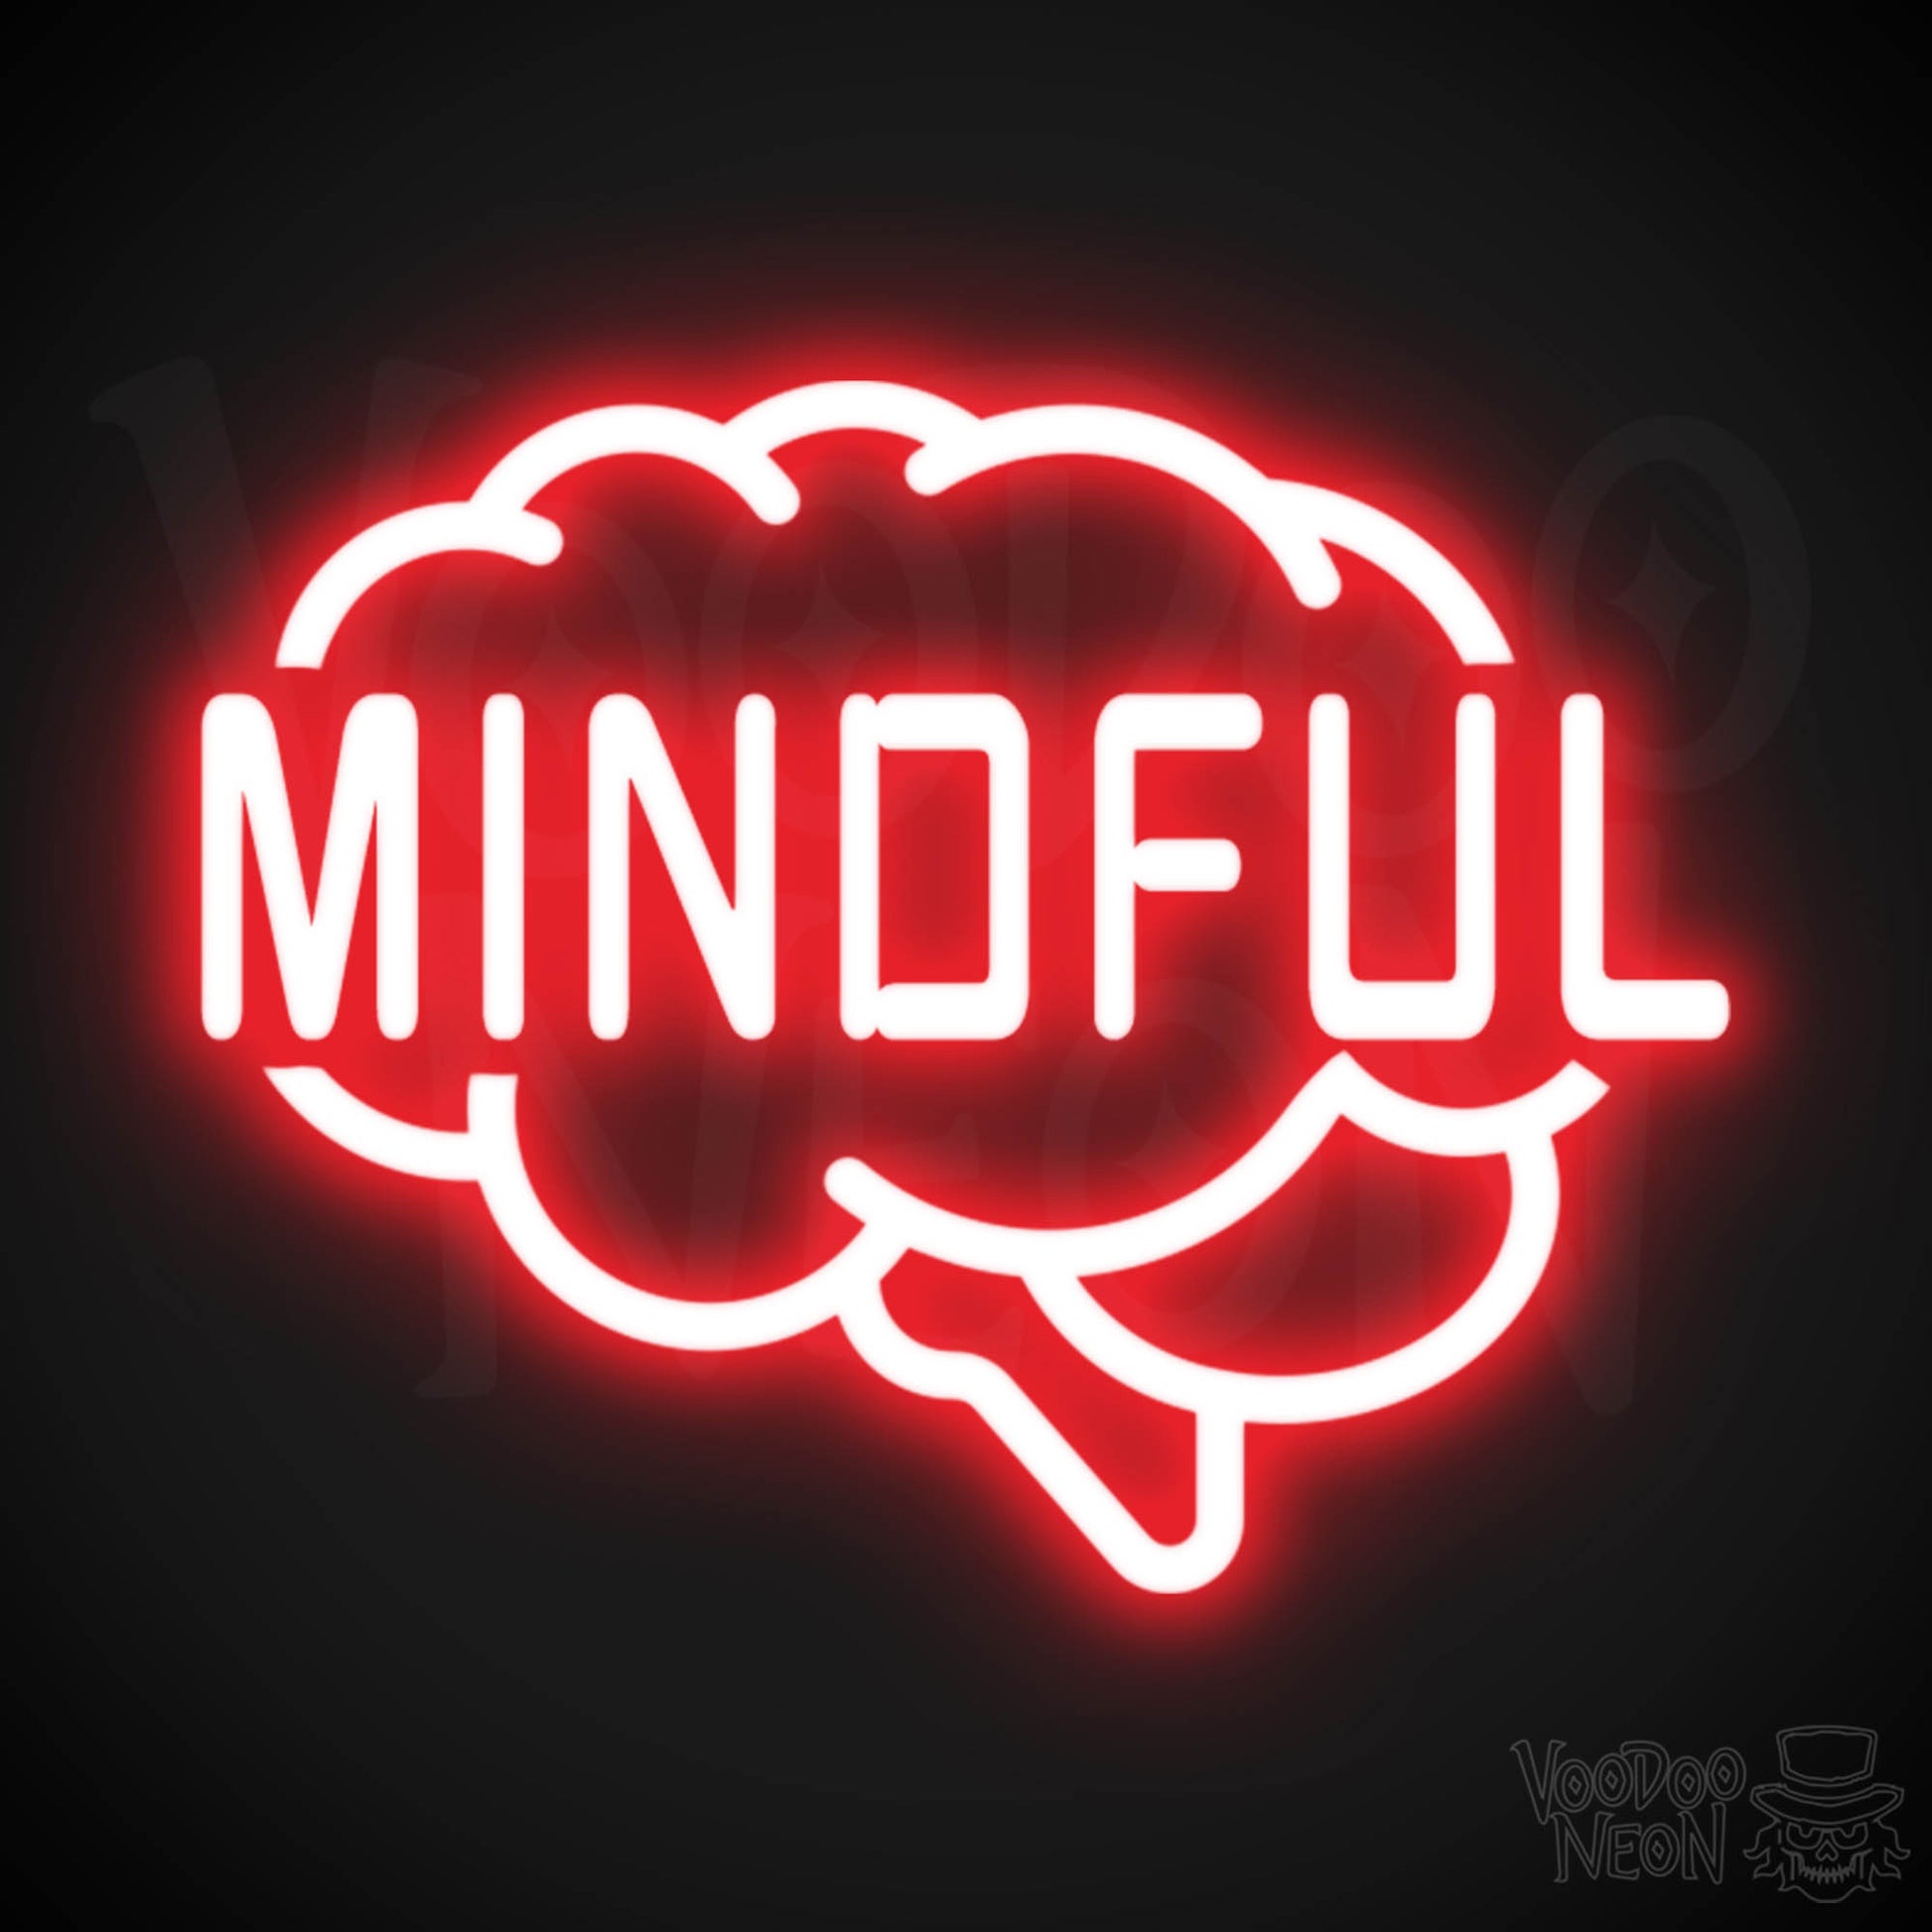 Mindful Neon Sign - Neon Mindful Sign - LED Sign - Color Red